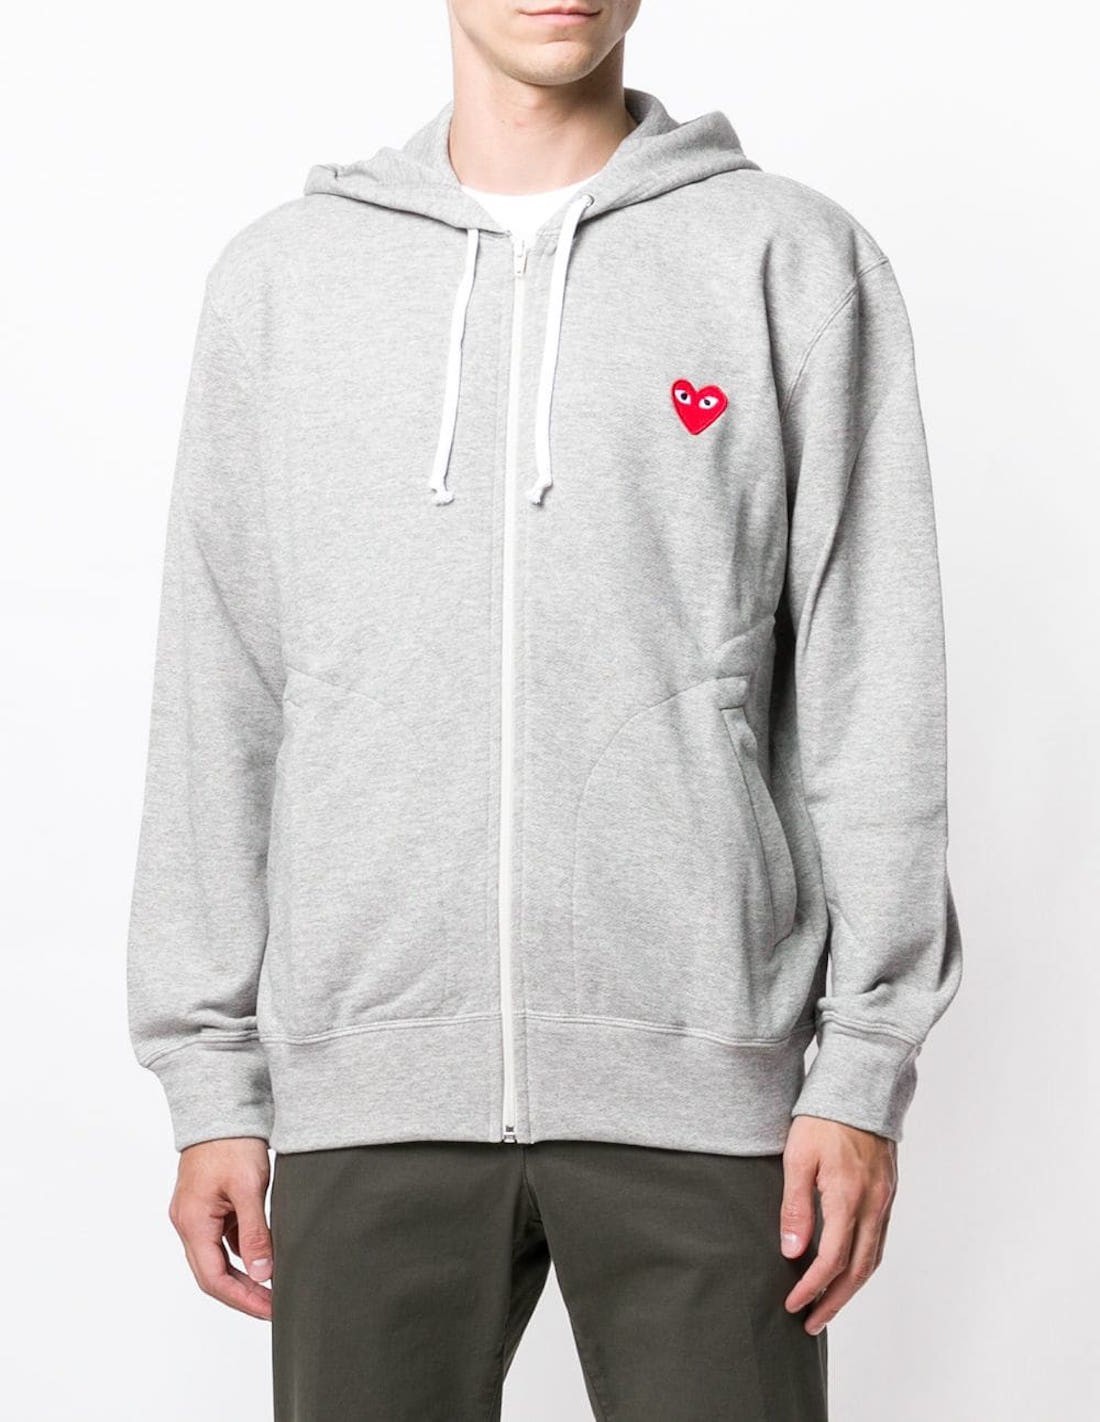 COMME DES GARCONS PLAY zipped hoodie in grey cotton with hearts on the back